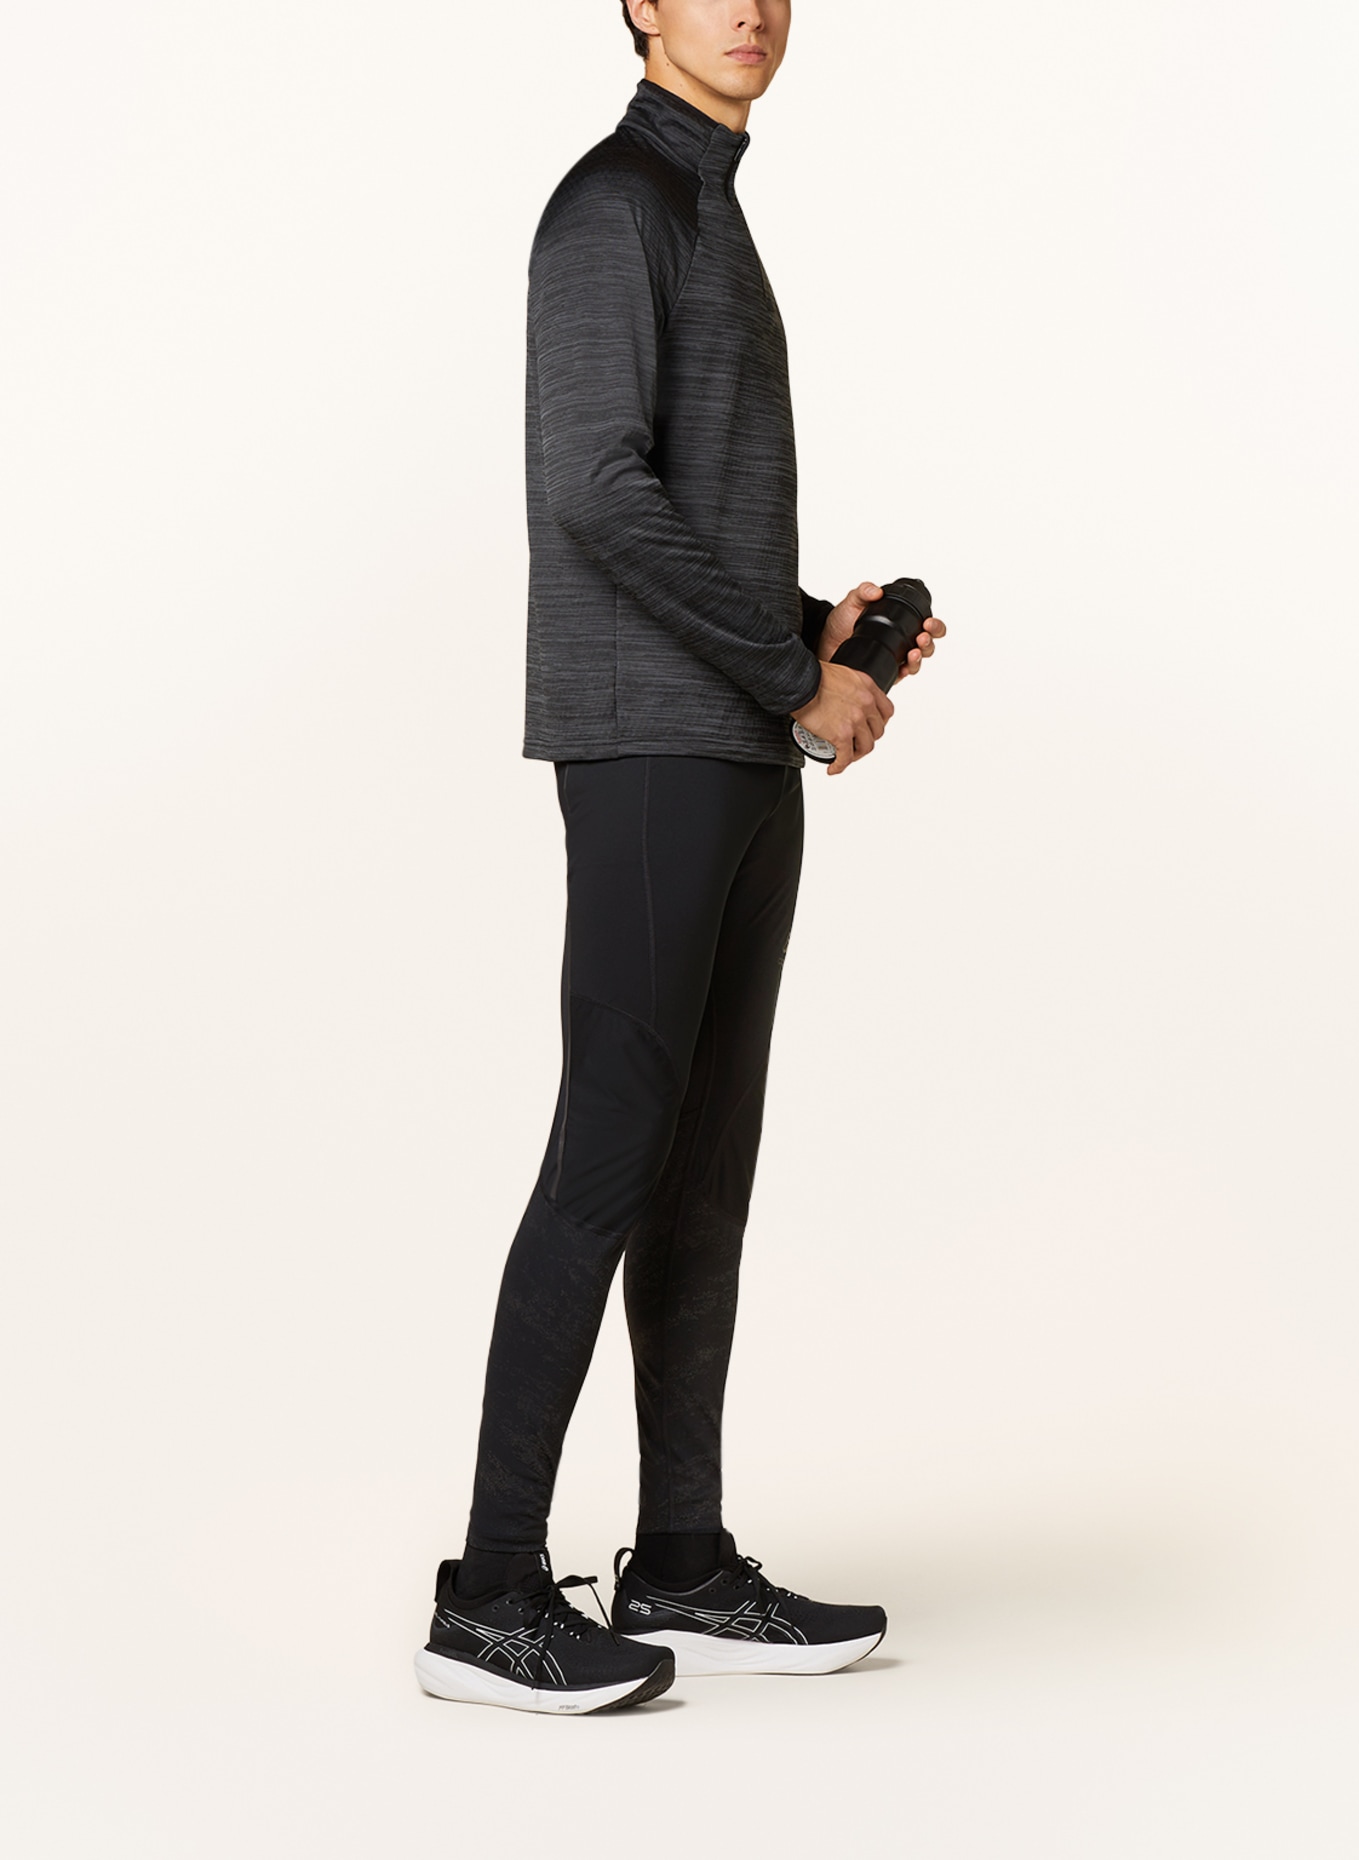 odlo Running tights ZEROWEIGHT WARM REFLECT in black